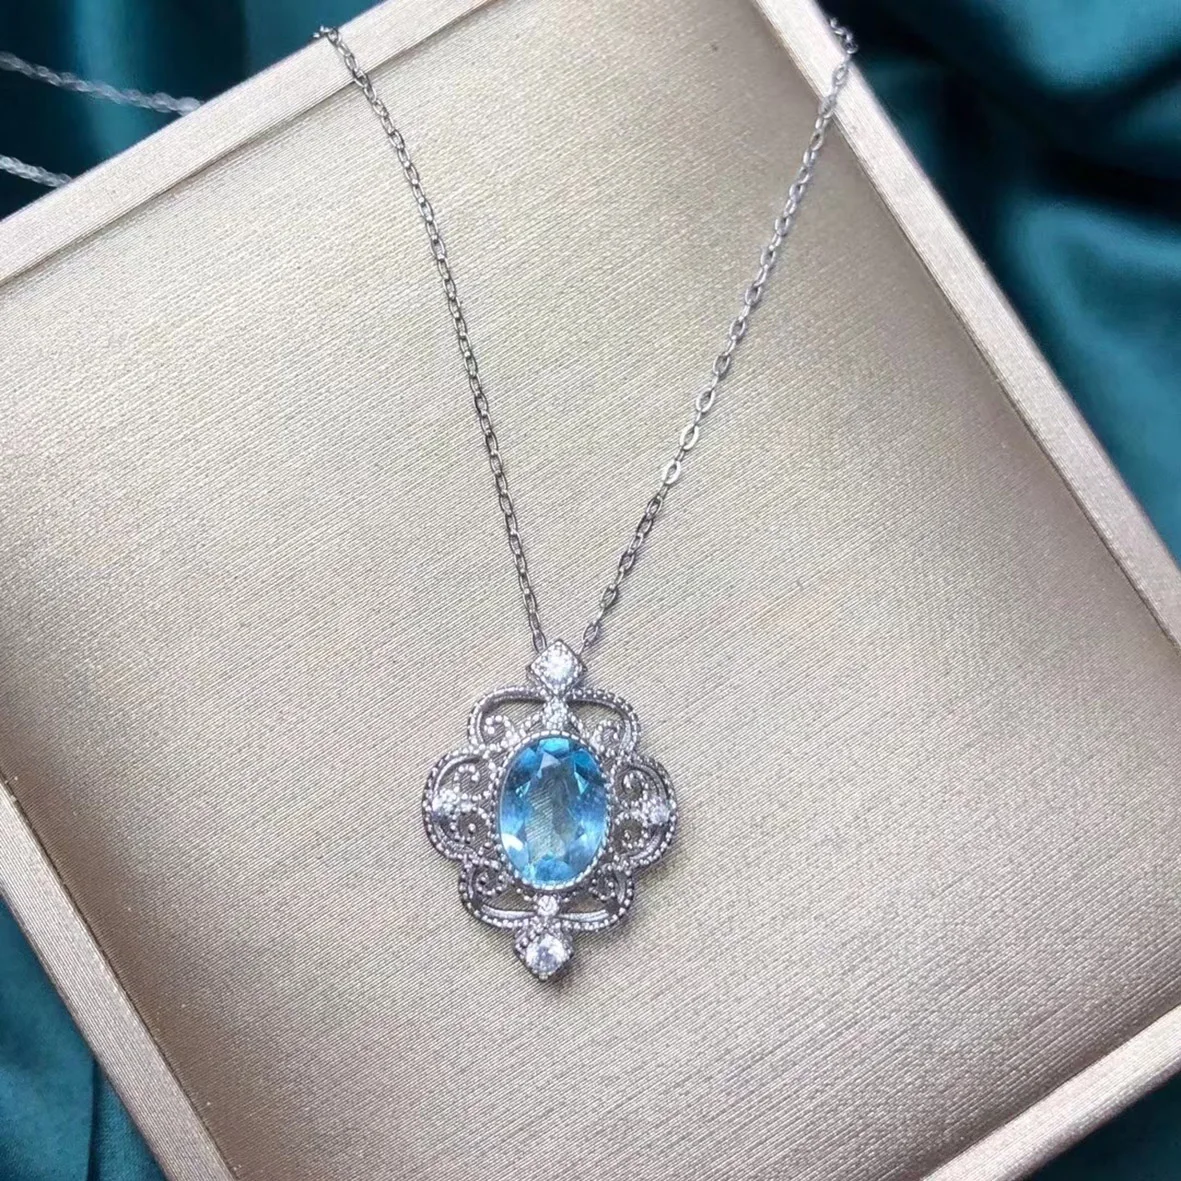 Ins Jewelry 925 Sterling Silver Dainty Necklace Natural Swiss Blue Topaz Pendant Birthstone Gems